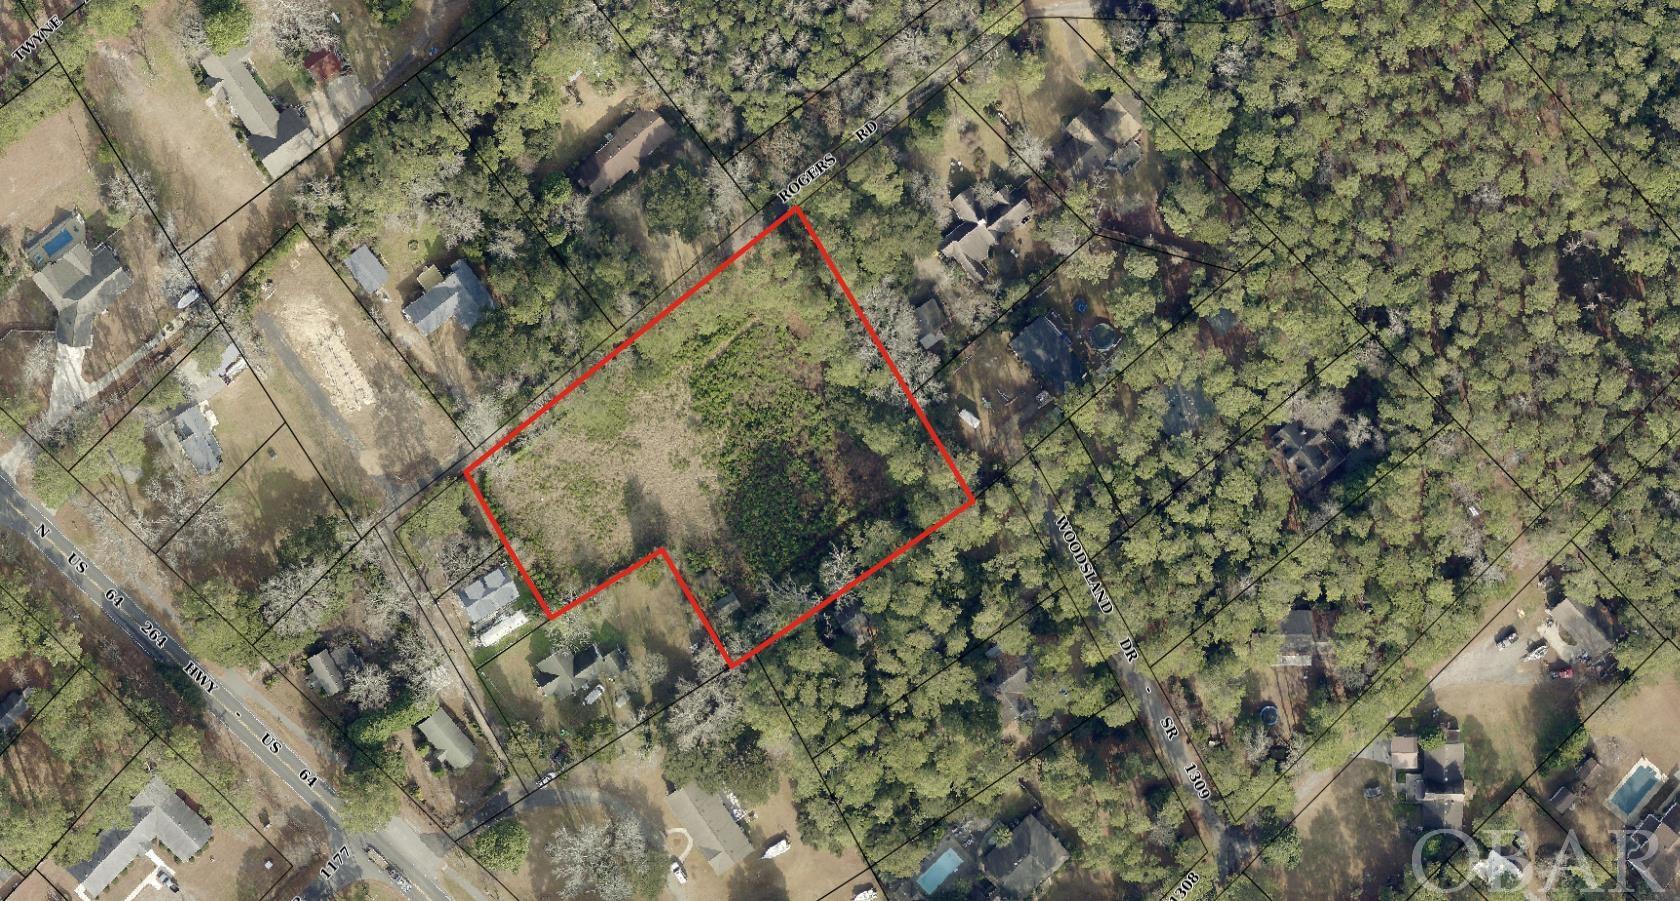 This is an enticing opportunity for anyone looking for a spacious and private lot in  Manteo on Roanoke Island. This parcel has approximately 335 feet of road frontage on Rogers Road and it appears there is a potential to divide the parcel into 3 or 4 lots! Whether you are looking to build a dream home with ample space for equestrian activities or considering investment opportunities through subdivision, this is the one. This is a flat parcel in the "X" flood zone that had previous fill and site work completed. Come check out this opportunity and dream big!